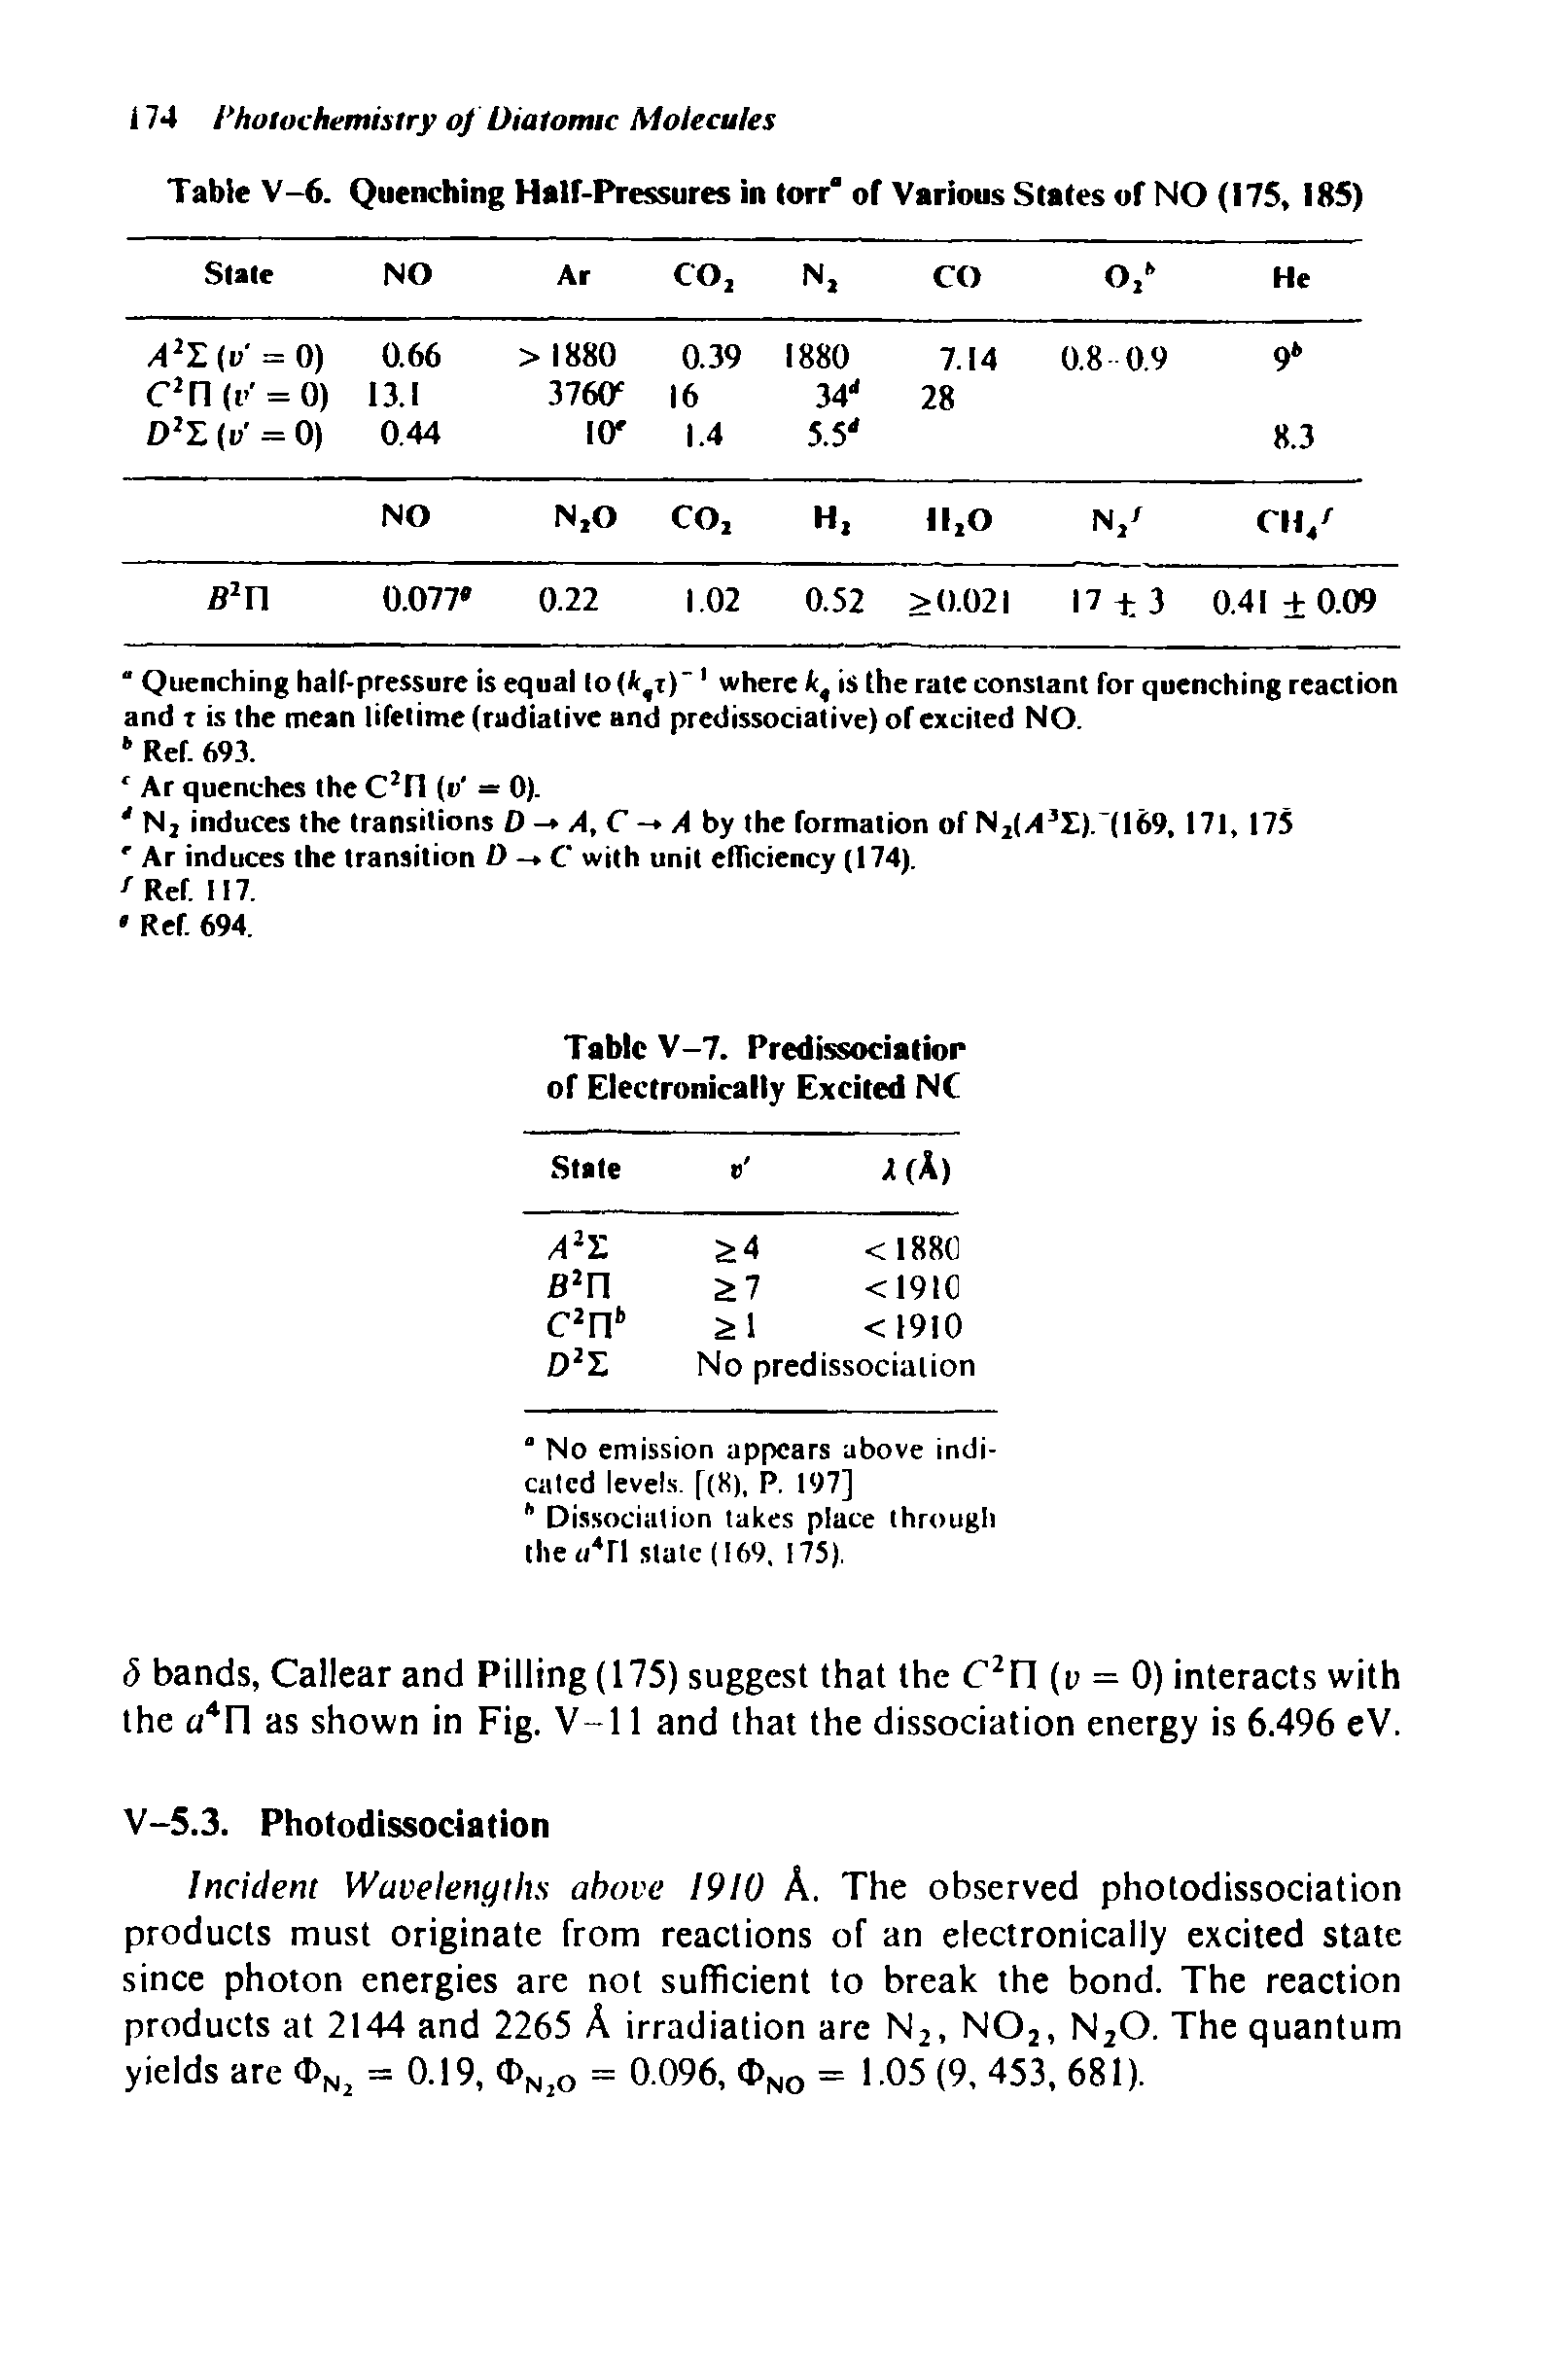 Table V-6. Quenching Half-Pressures in torr of Various States of NO (175, 185)...